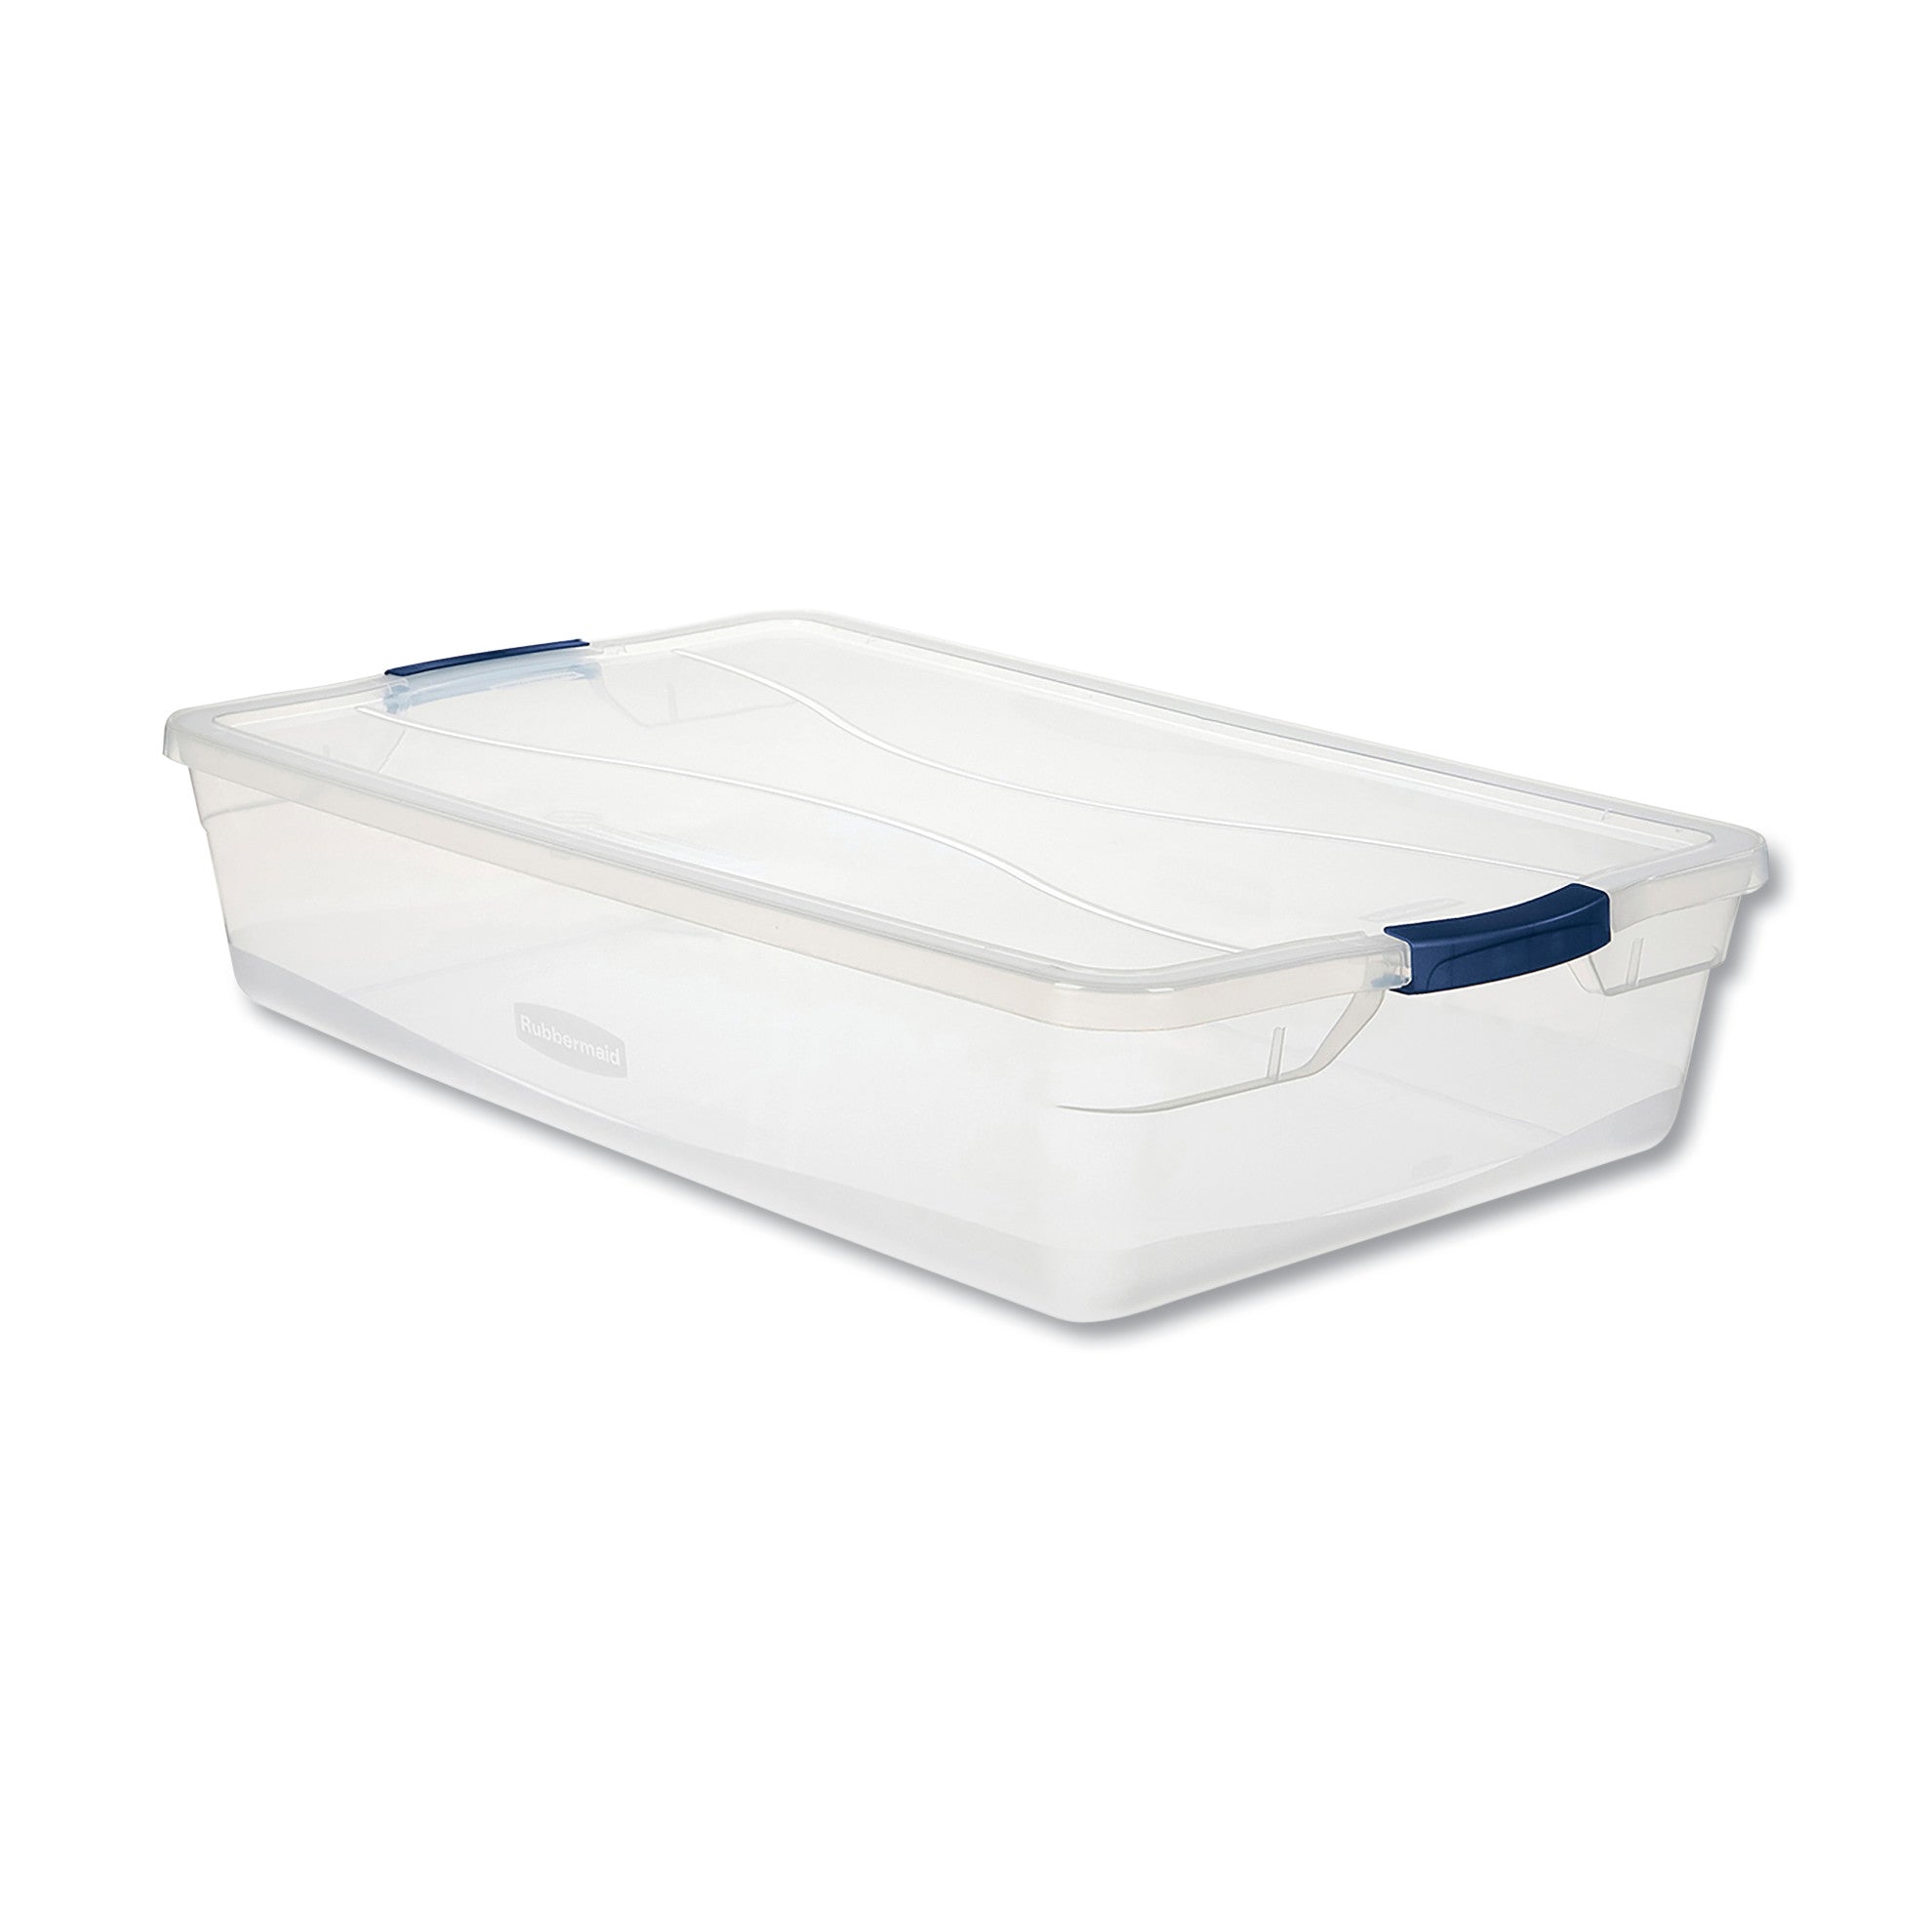 clever-store-basic-latch-lid-container-41-qt-1775-x-29-x-613-clear_unxrmcc410001 - 1